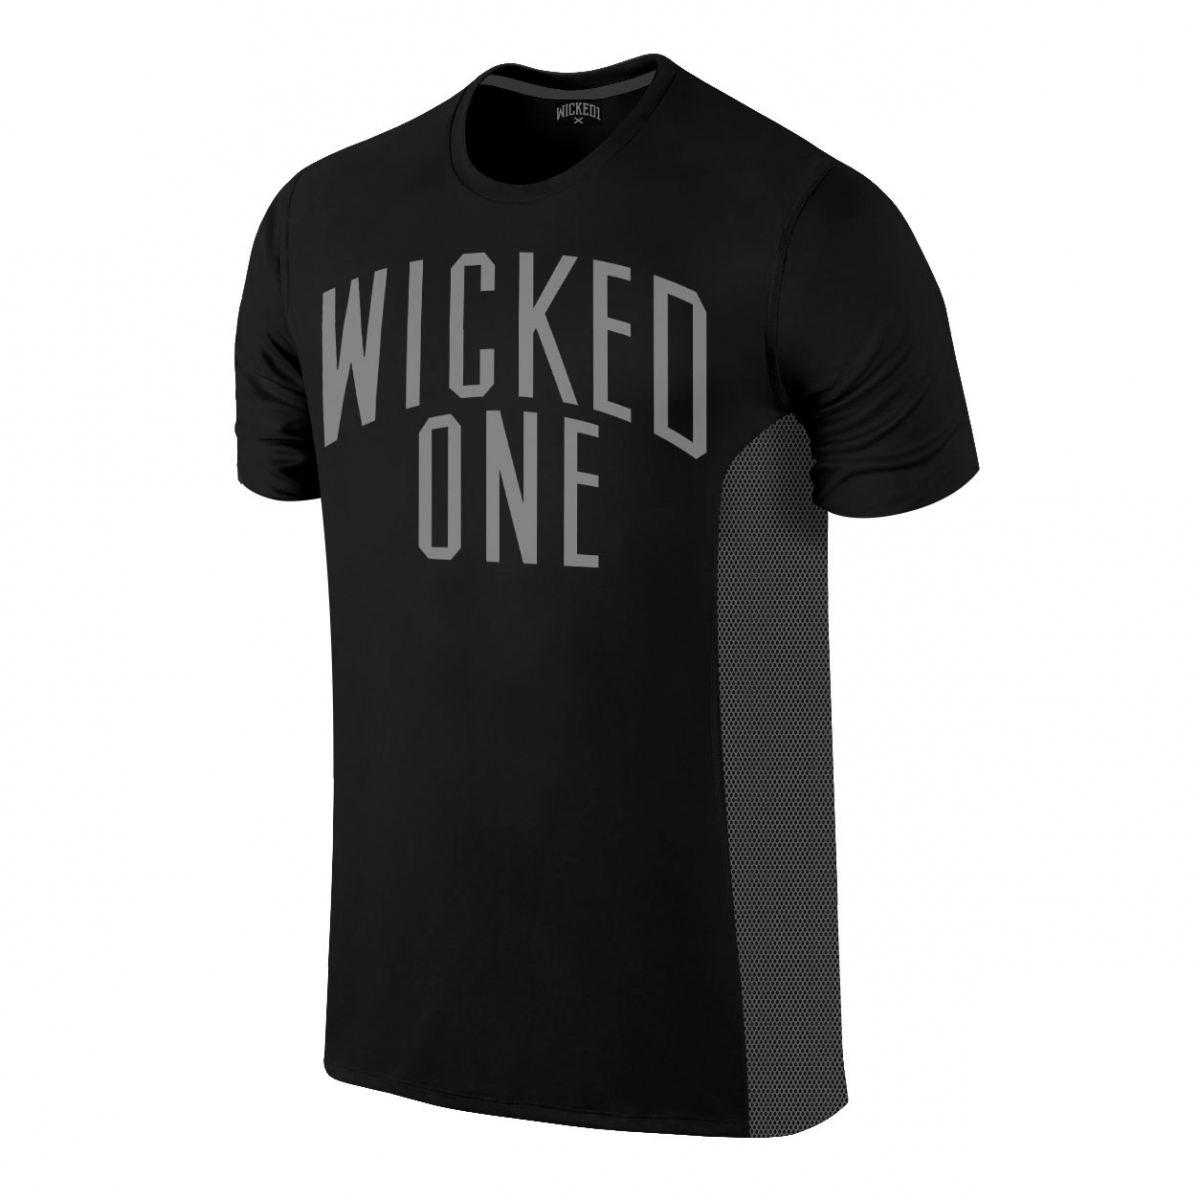 T-shirt Wicked one Fine mesh